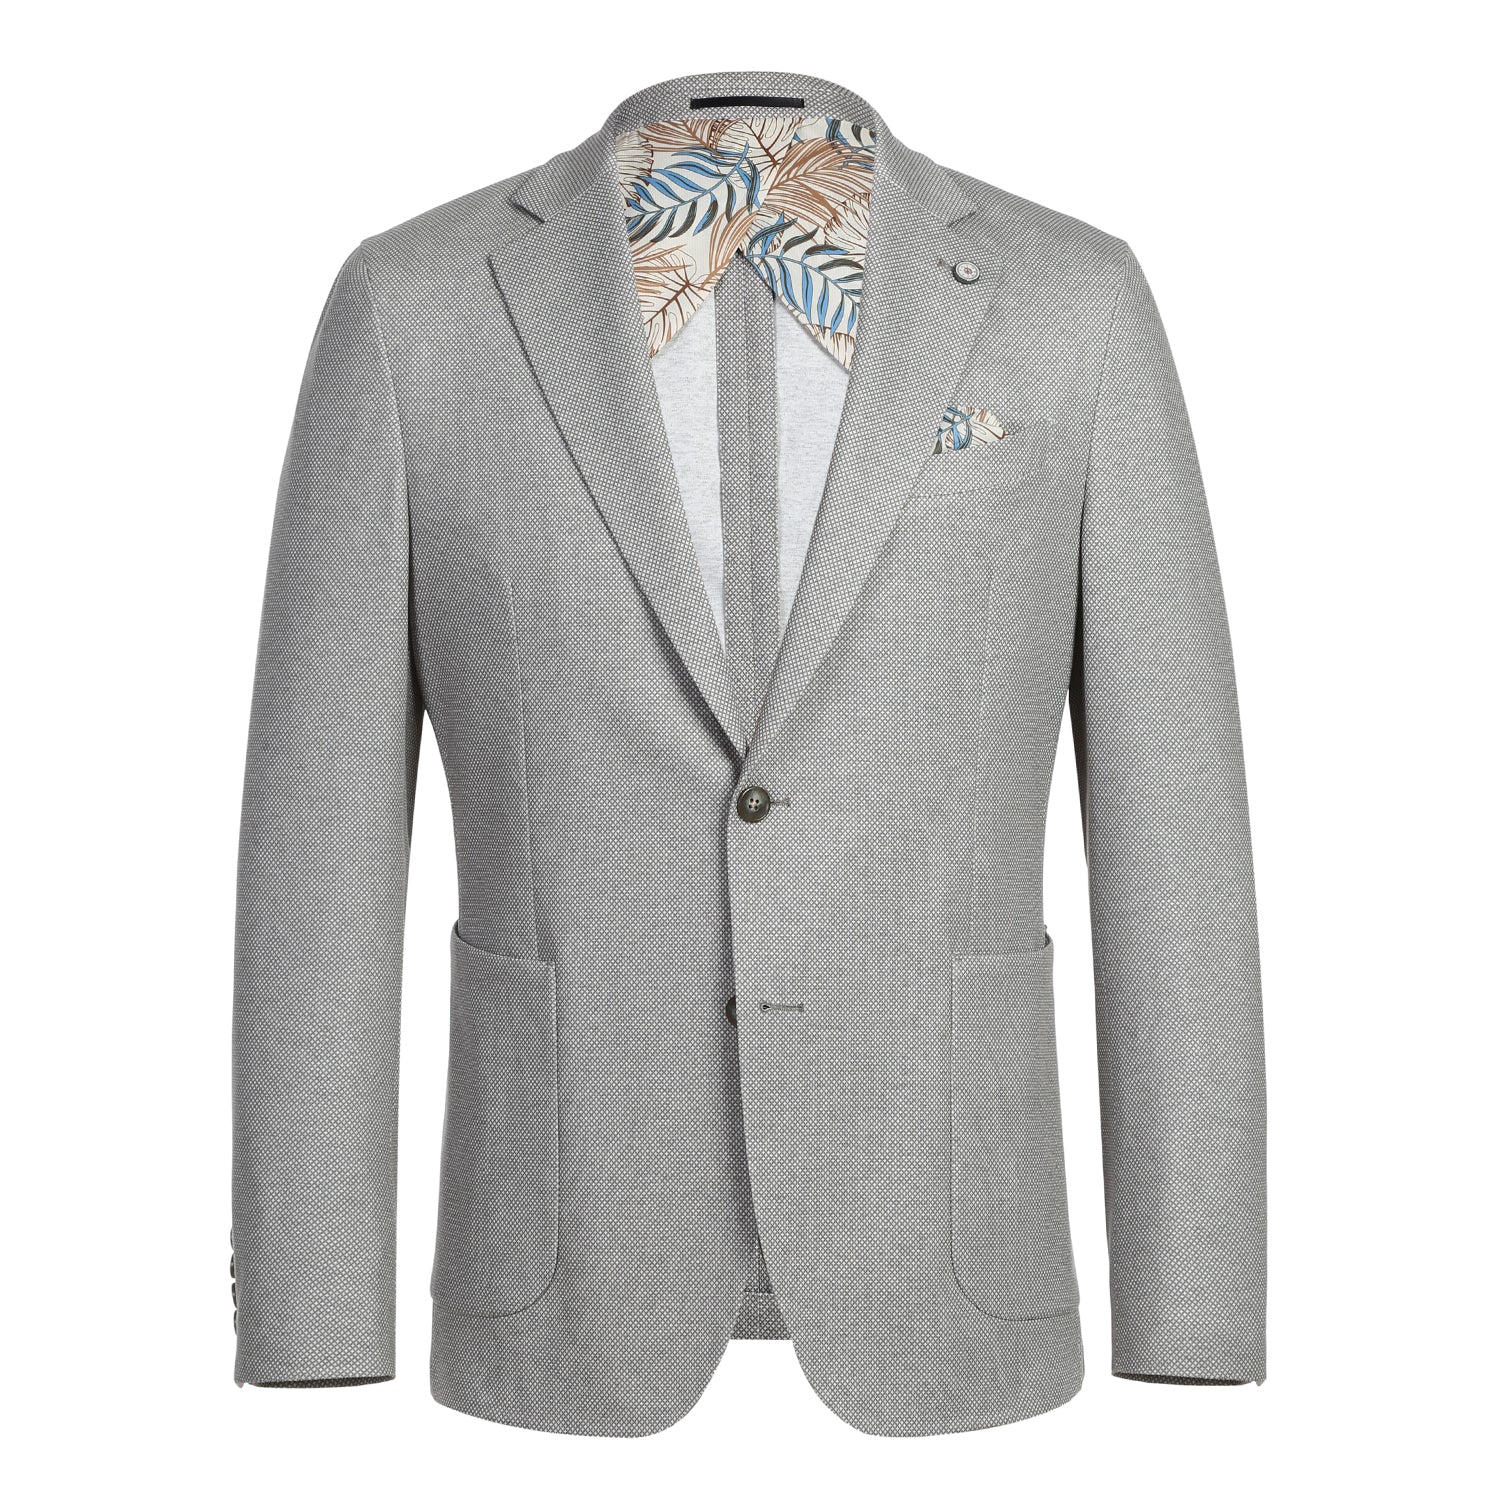 Single Breasted SLIM FIT Half Canvas Soft Jacket in Grey (Short, Regular, and Long Available) by Pelago